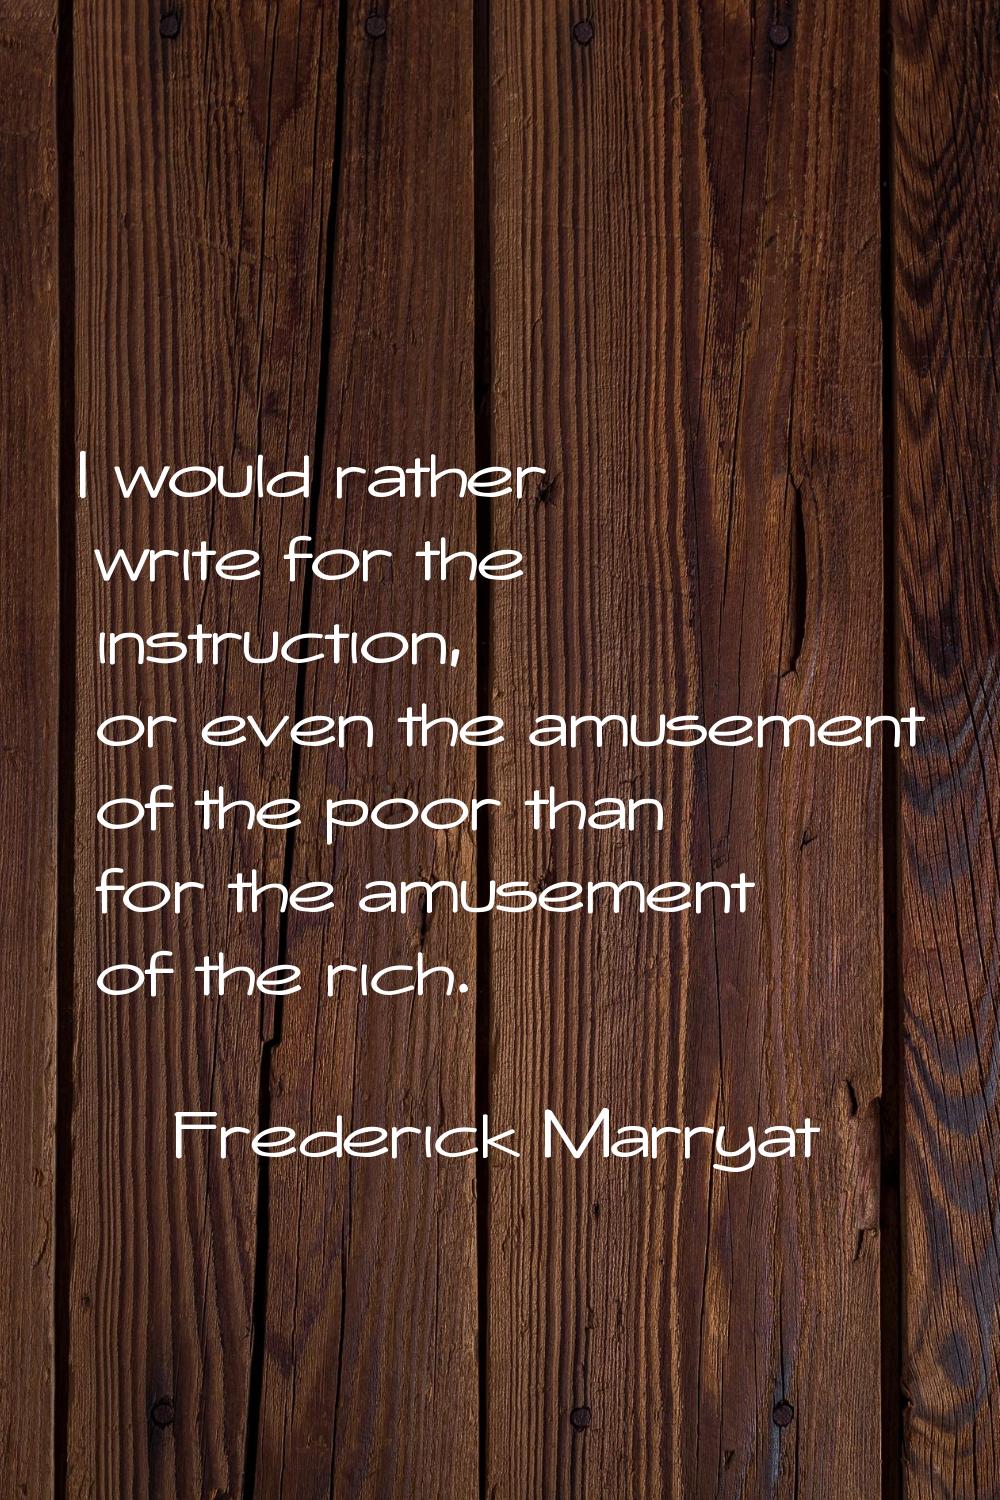 I would rather write for the instruction, or even the amusement of the poor than for the amusement 